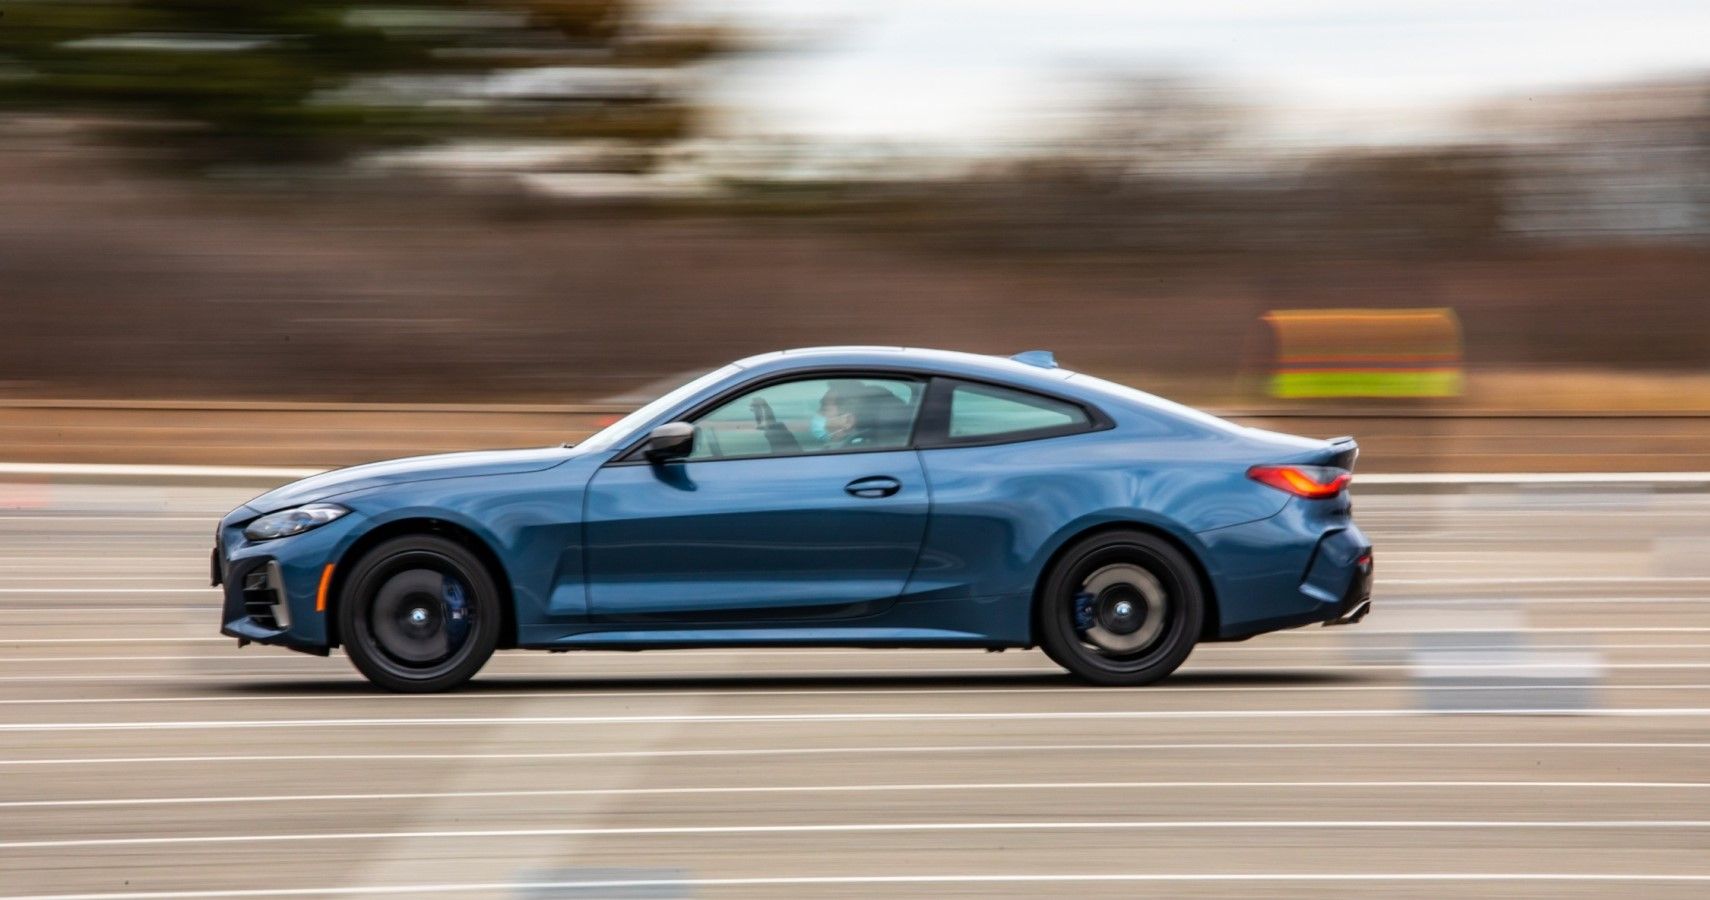 BMW M4 accelerating side view